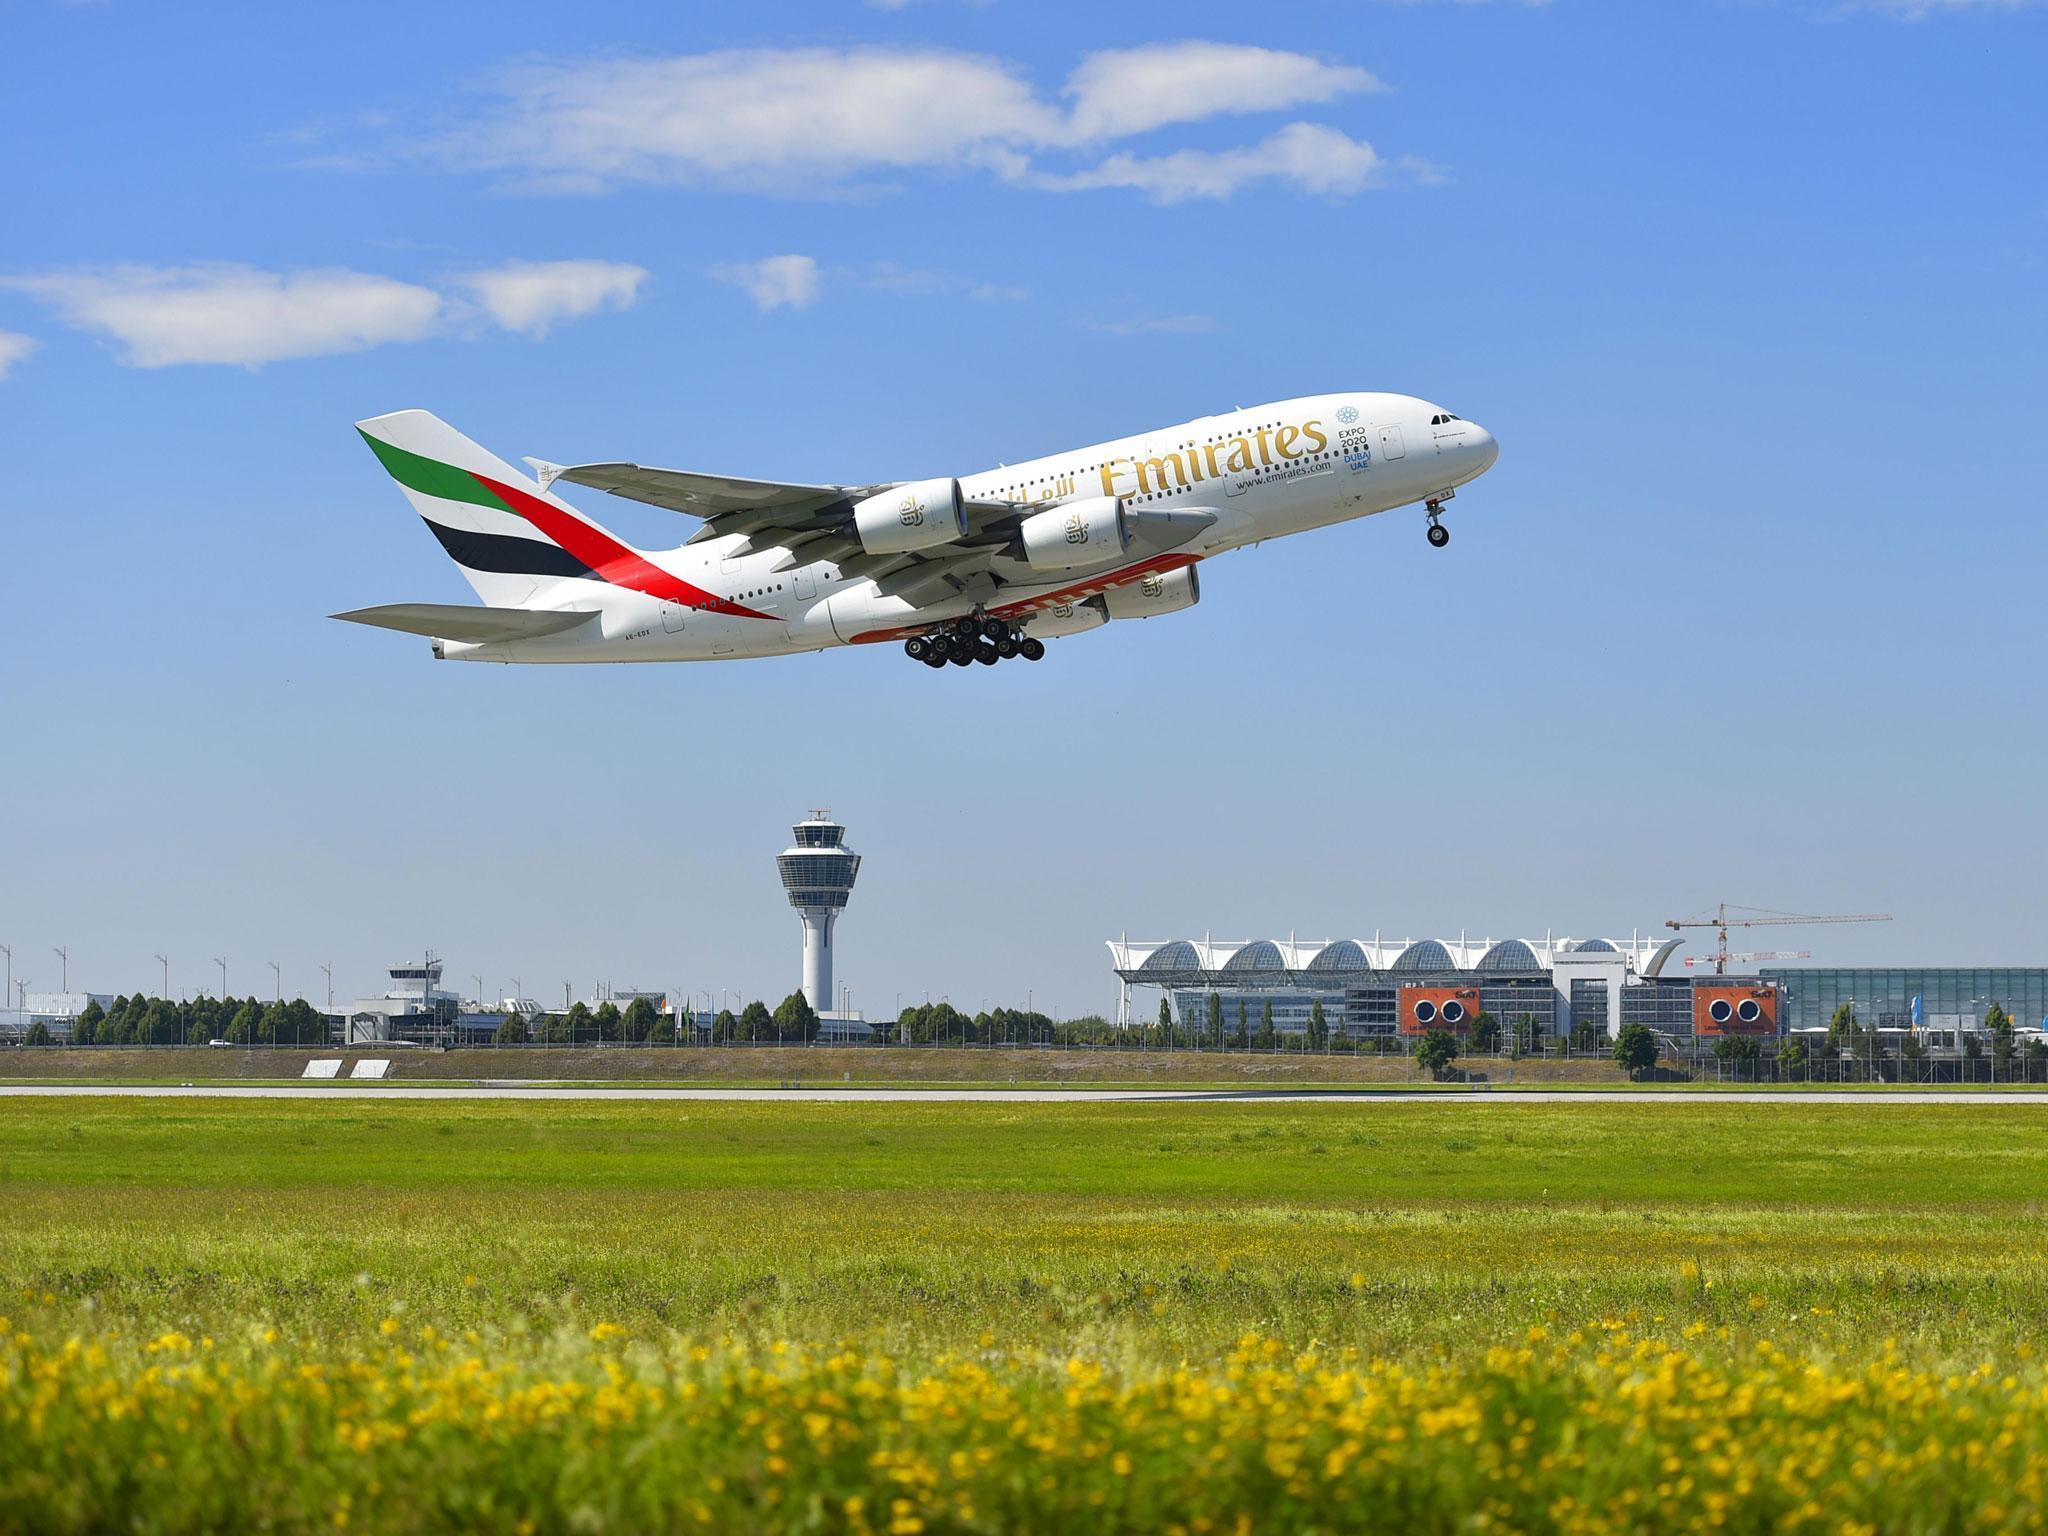 Emirates refunded the APD on flights that customers had booked directly, but not those booked via a travel company